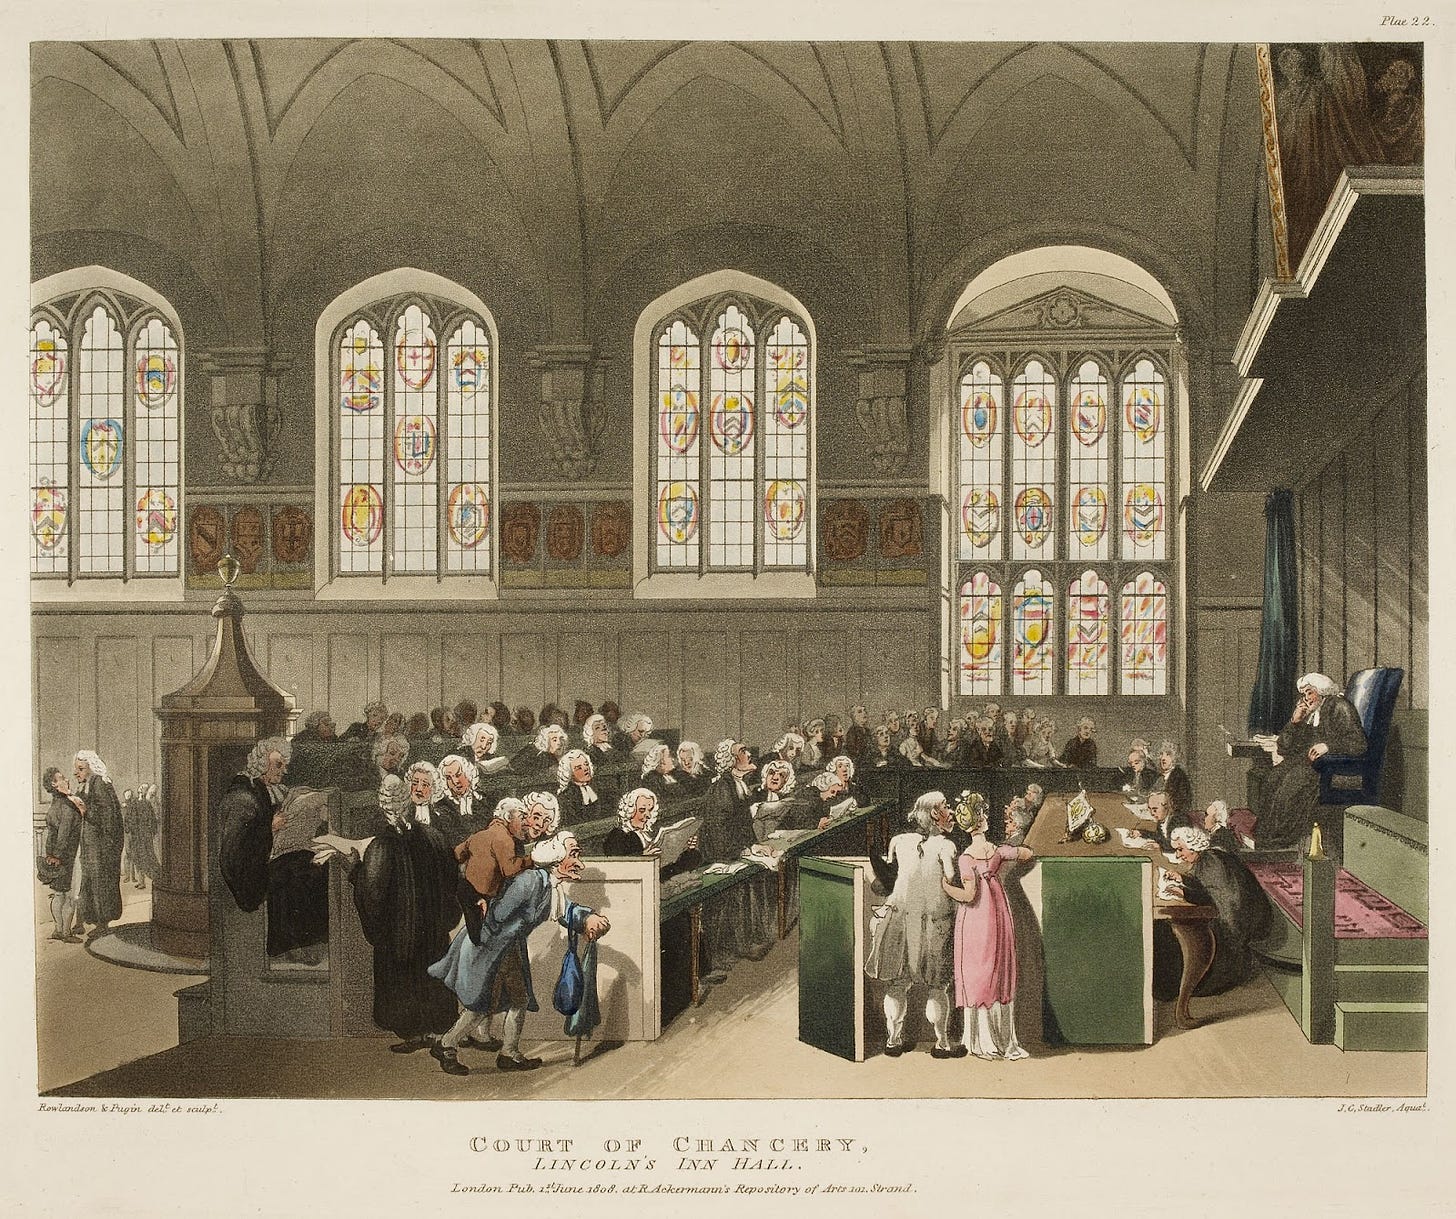 The Court of Chancery | Smithsonian Institution Archives